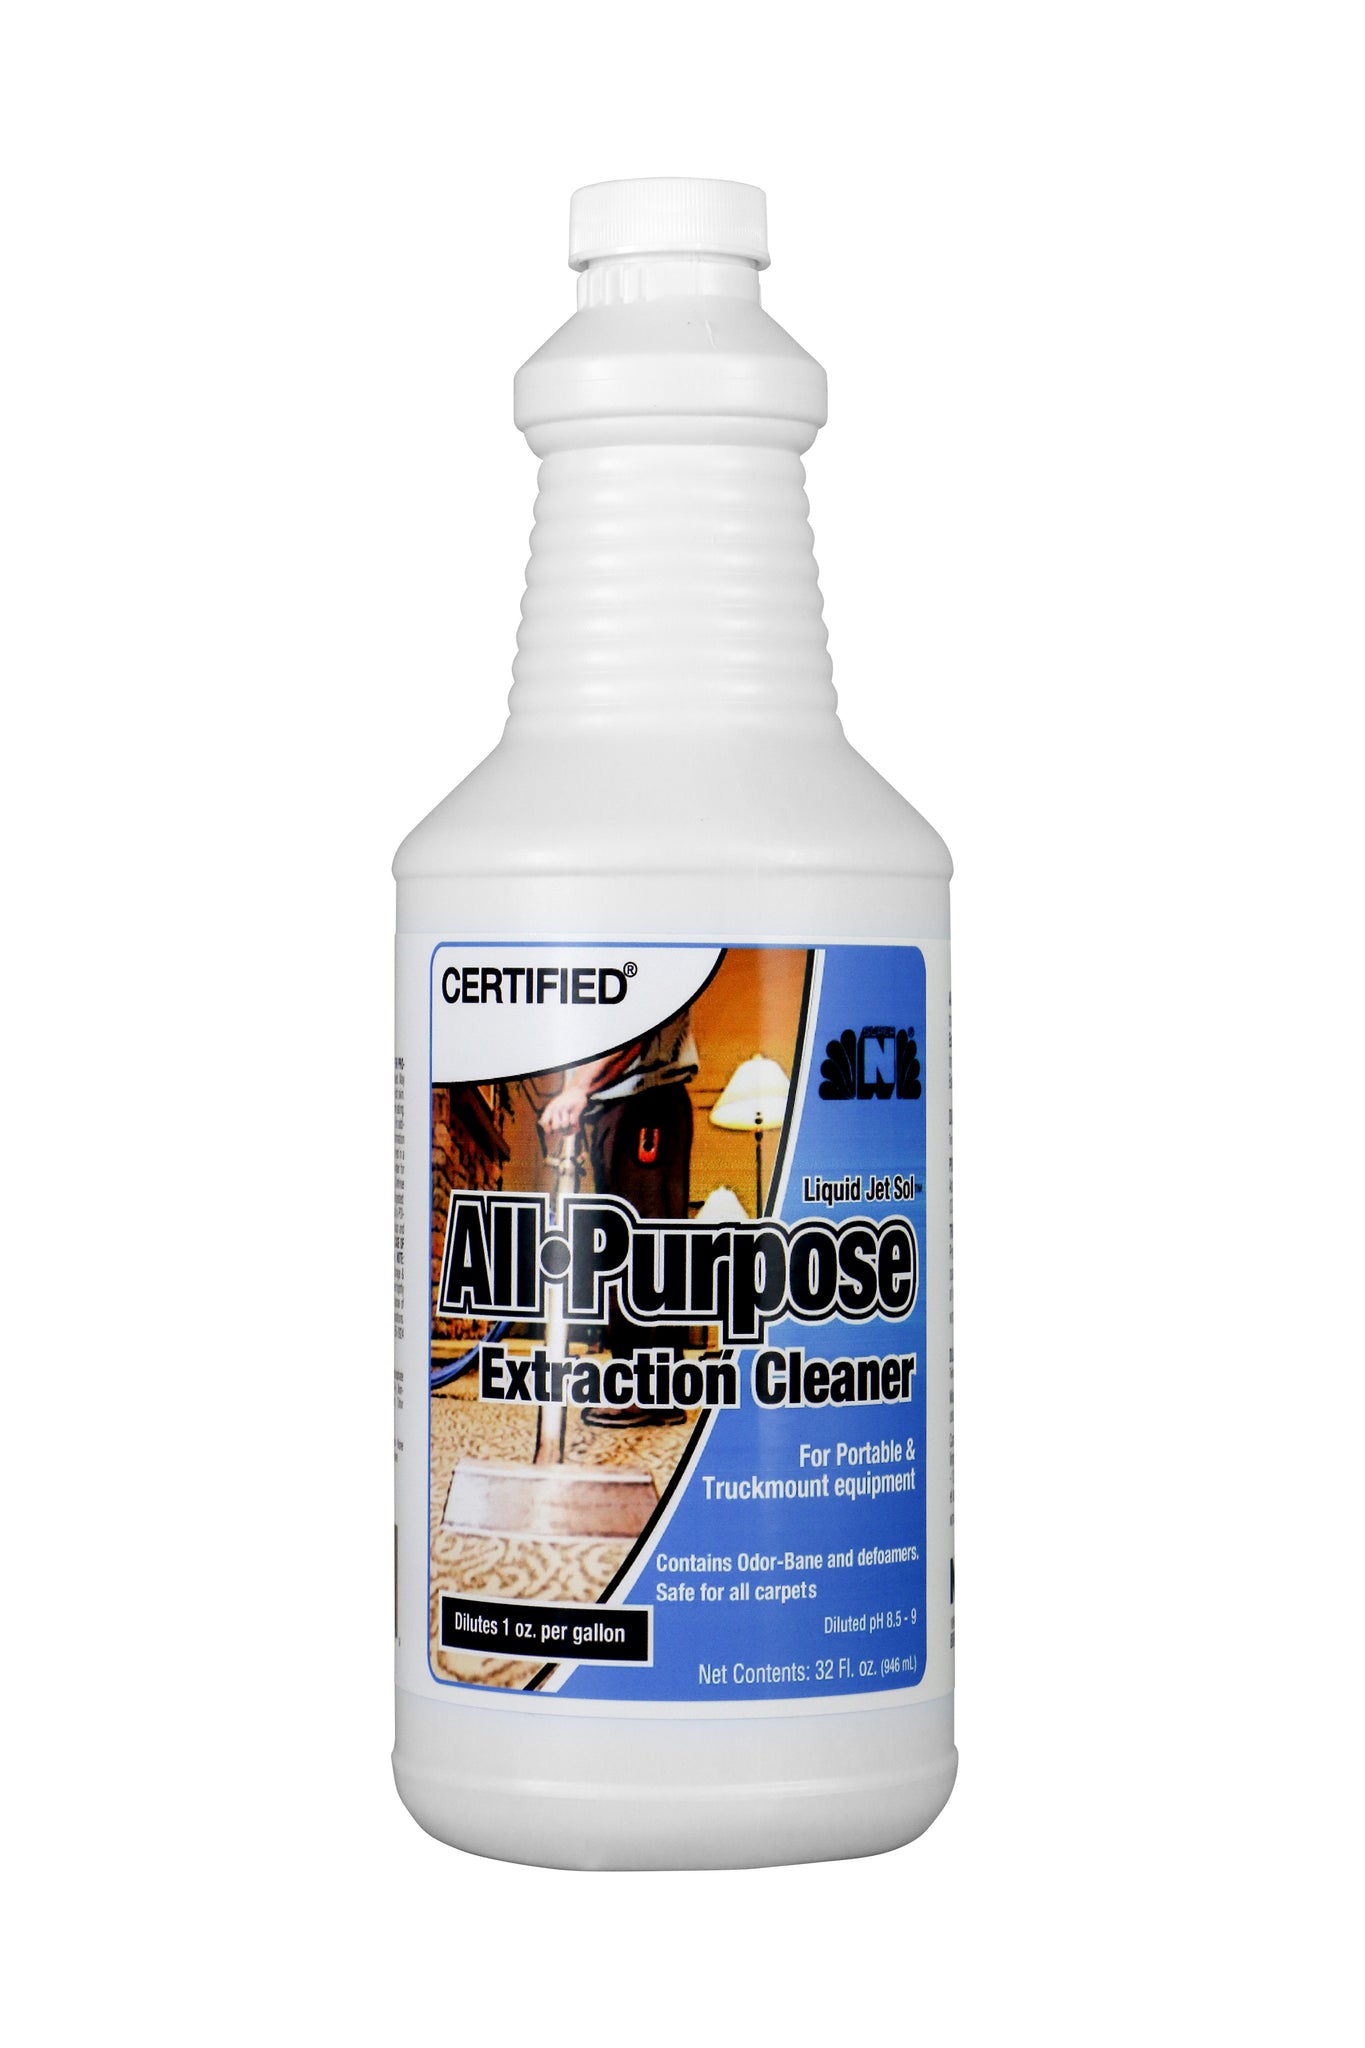 CARPET CLEANER/ "All-Purpose" Extraction Cleaner